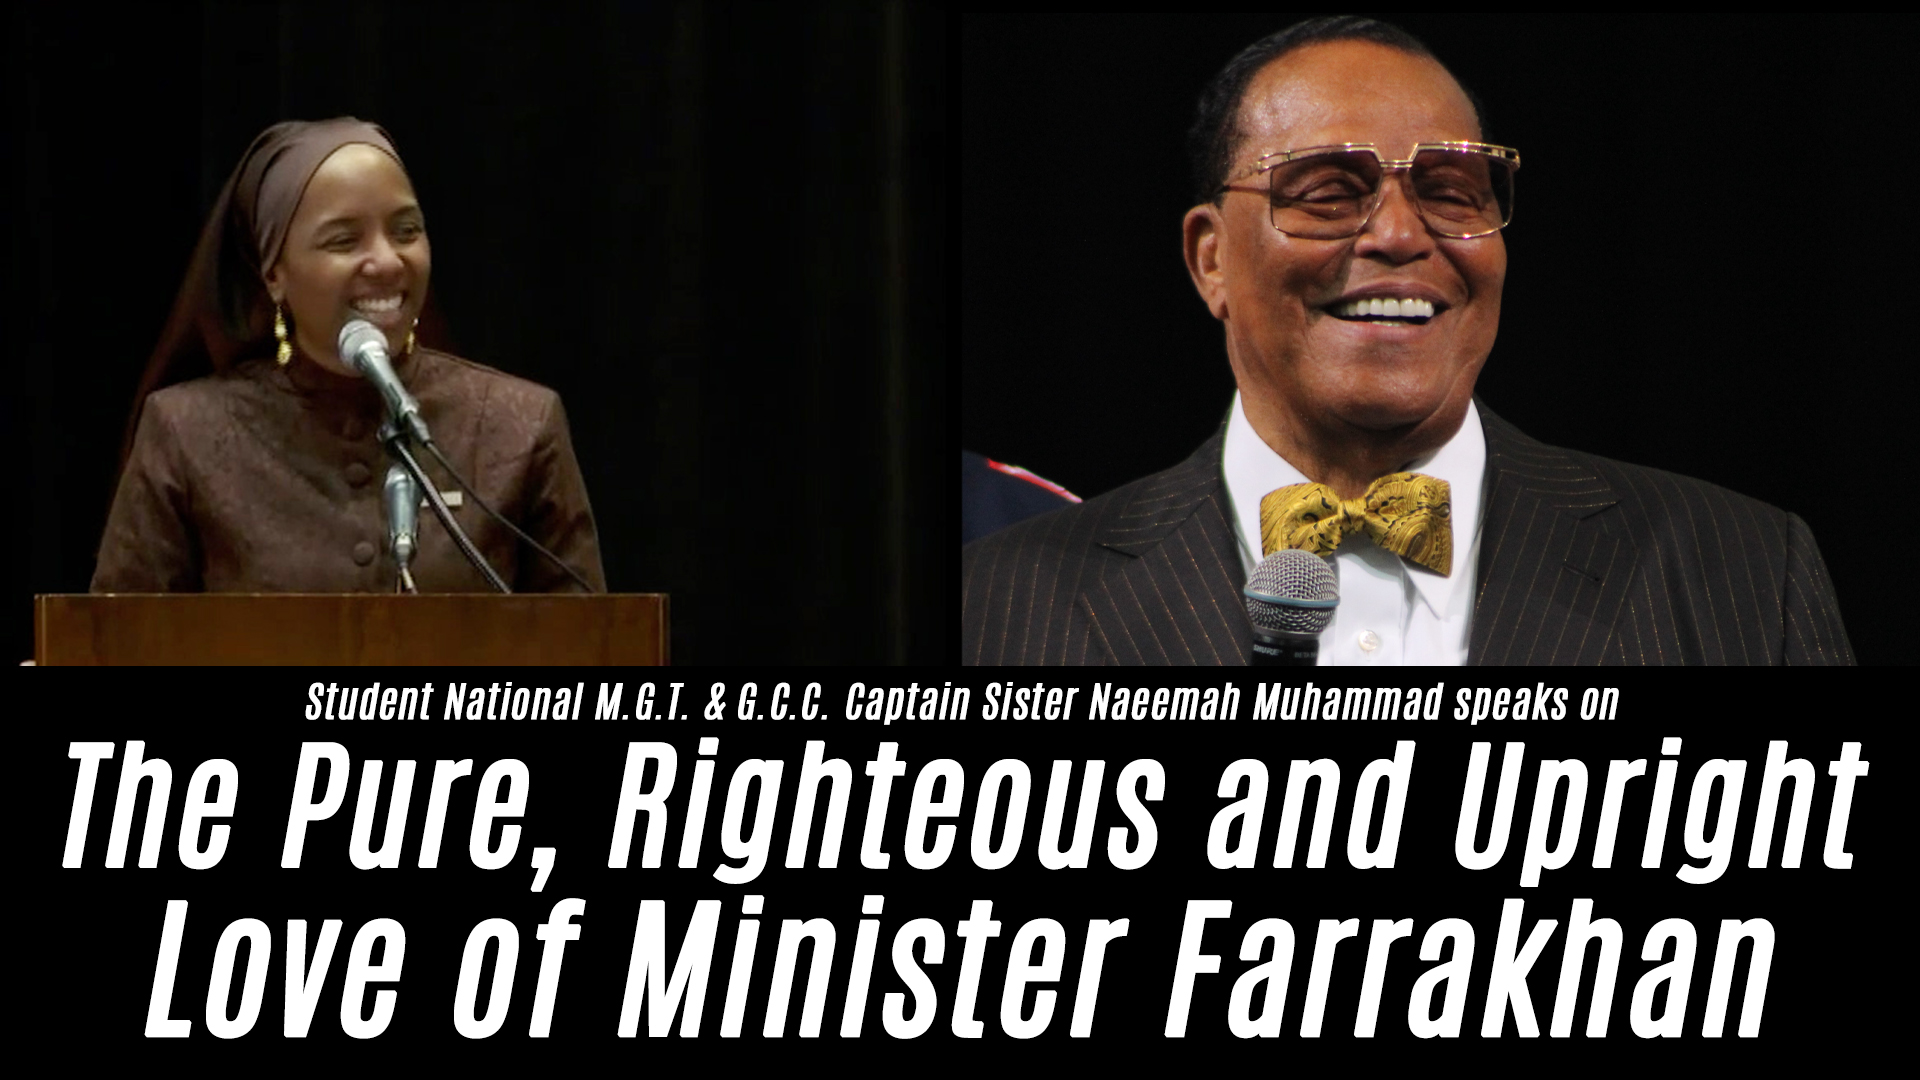 Sister Naeemah Muhammad Speaks on the Love and Example of Minister Farrakhan